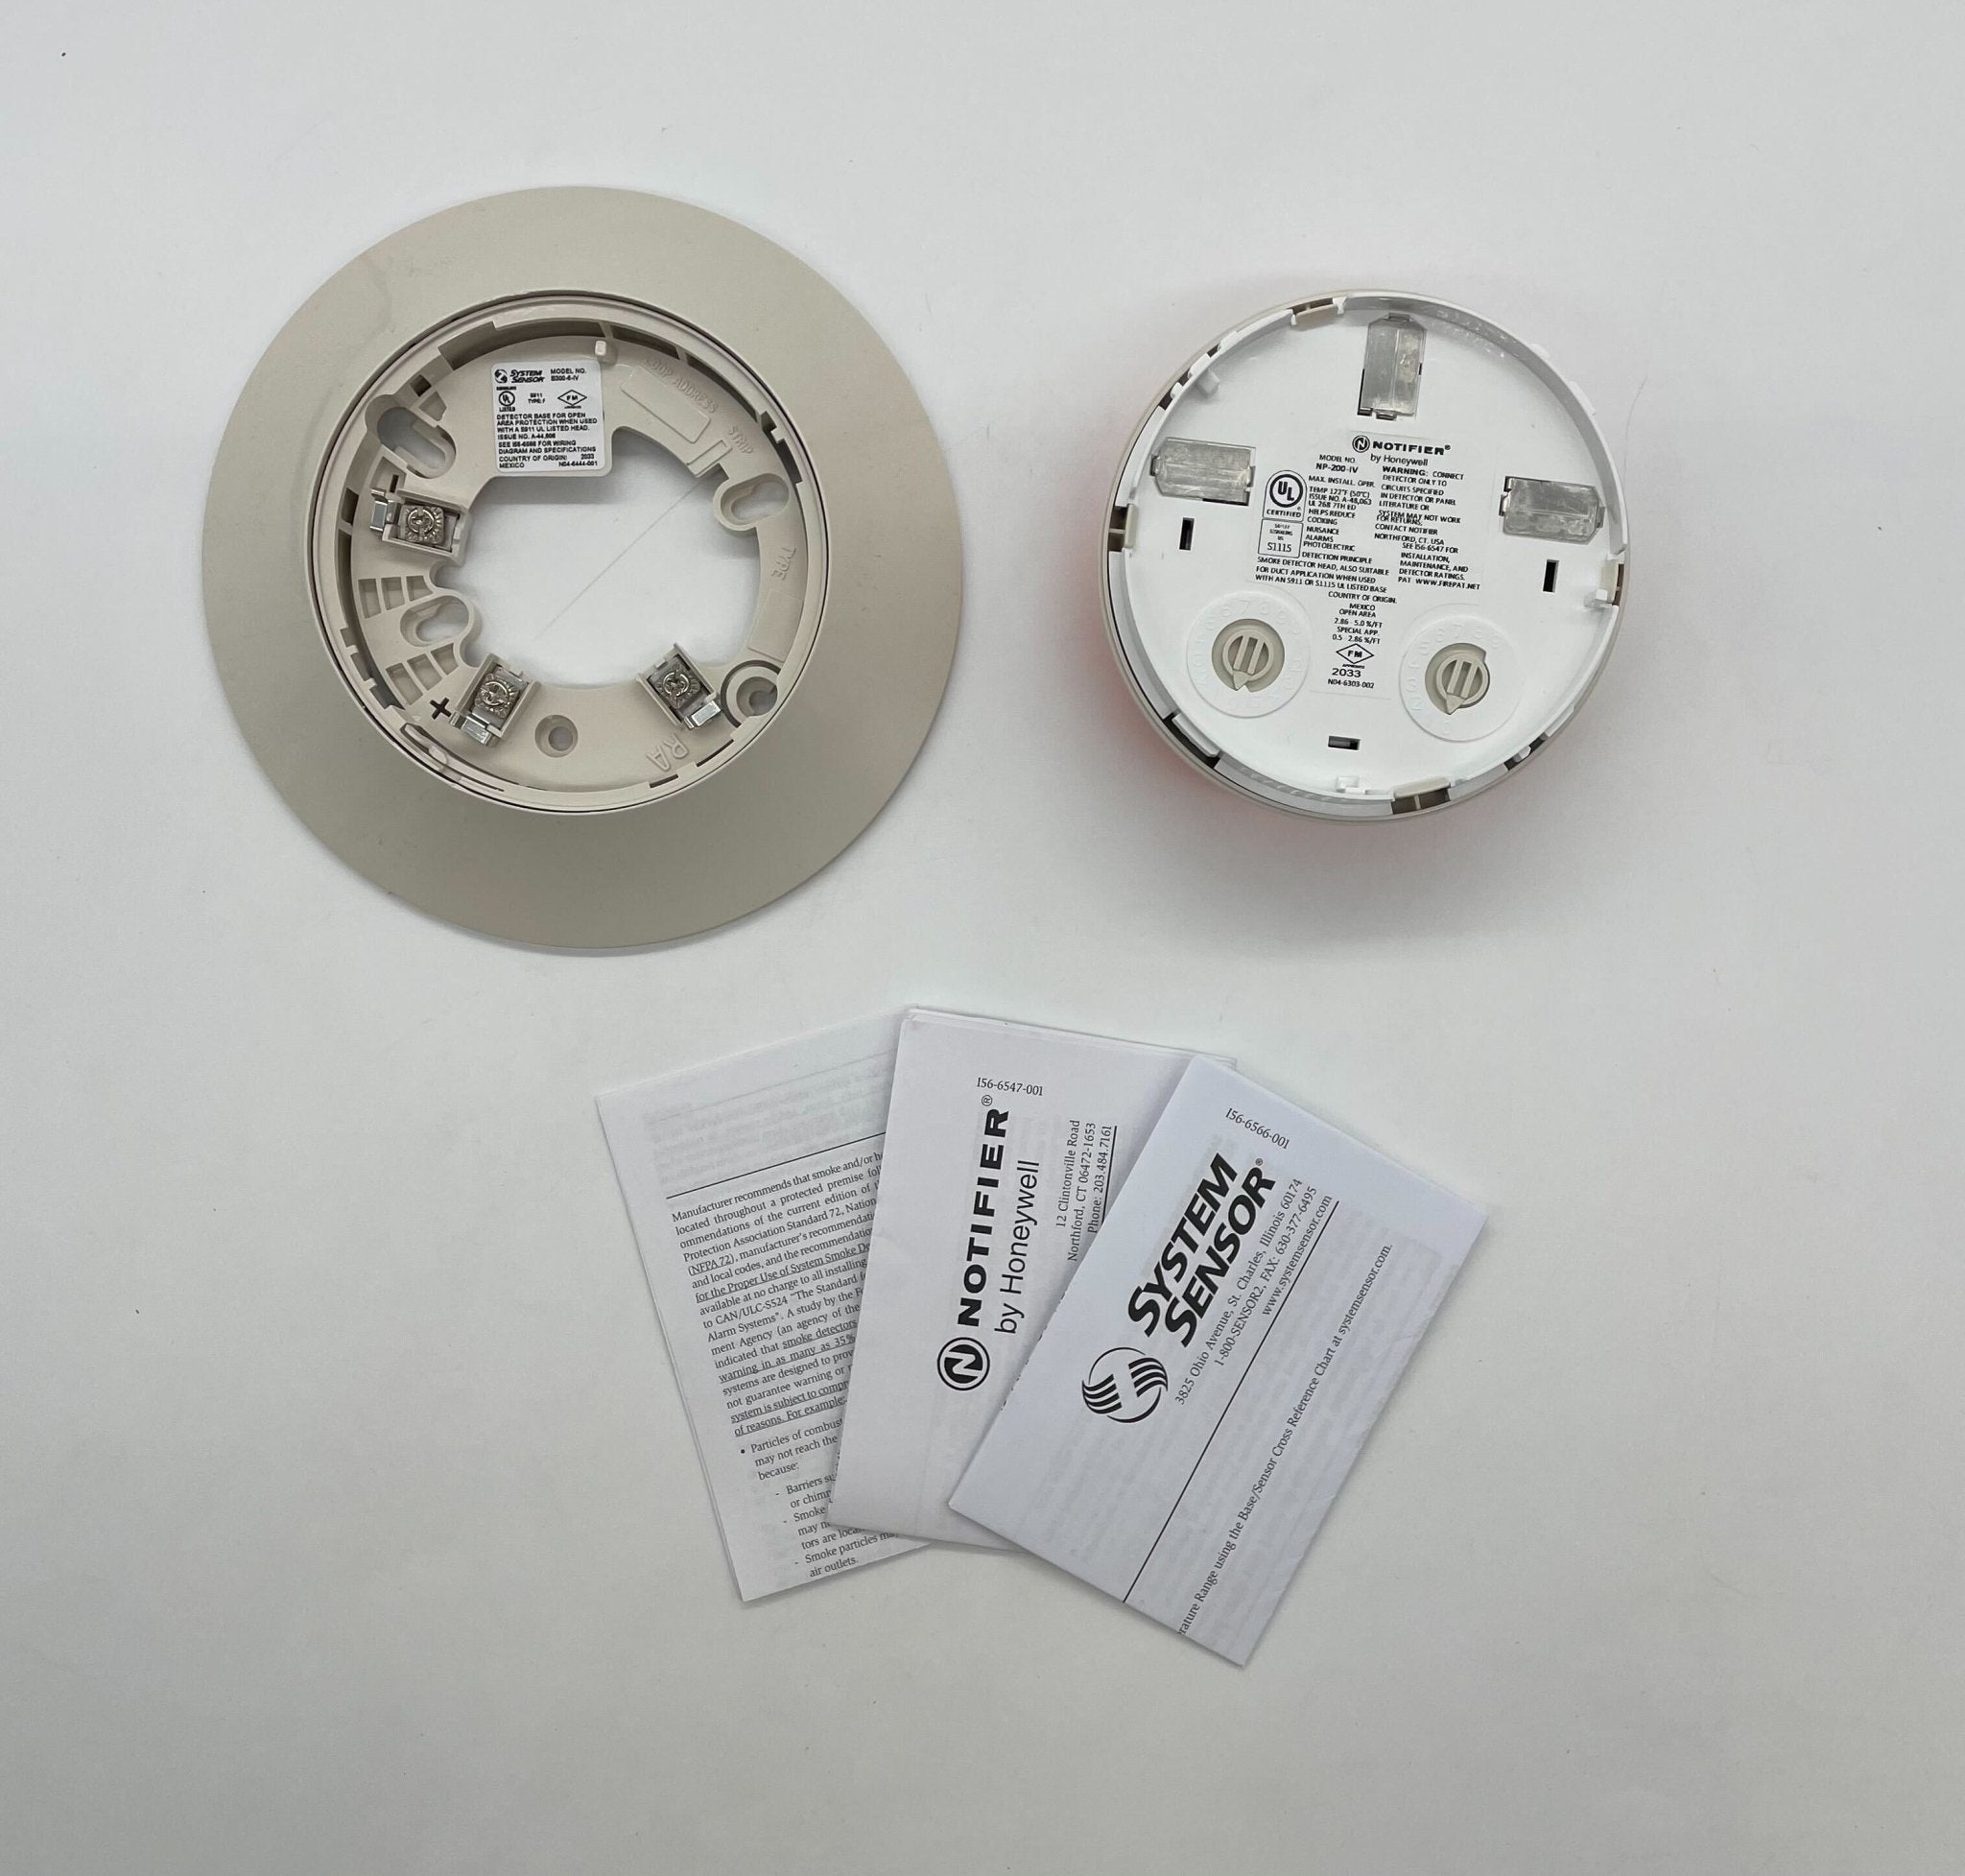 Notifier NP-200-IV (Replaces NP-100) - The Fire Alarm Supplier